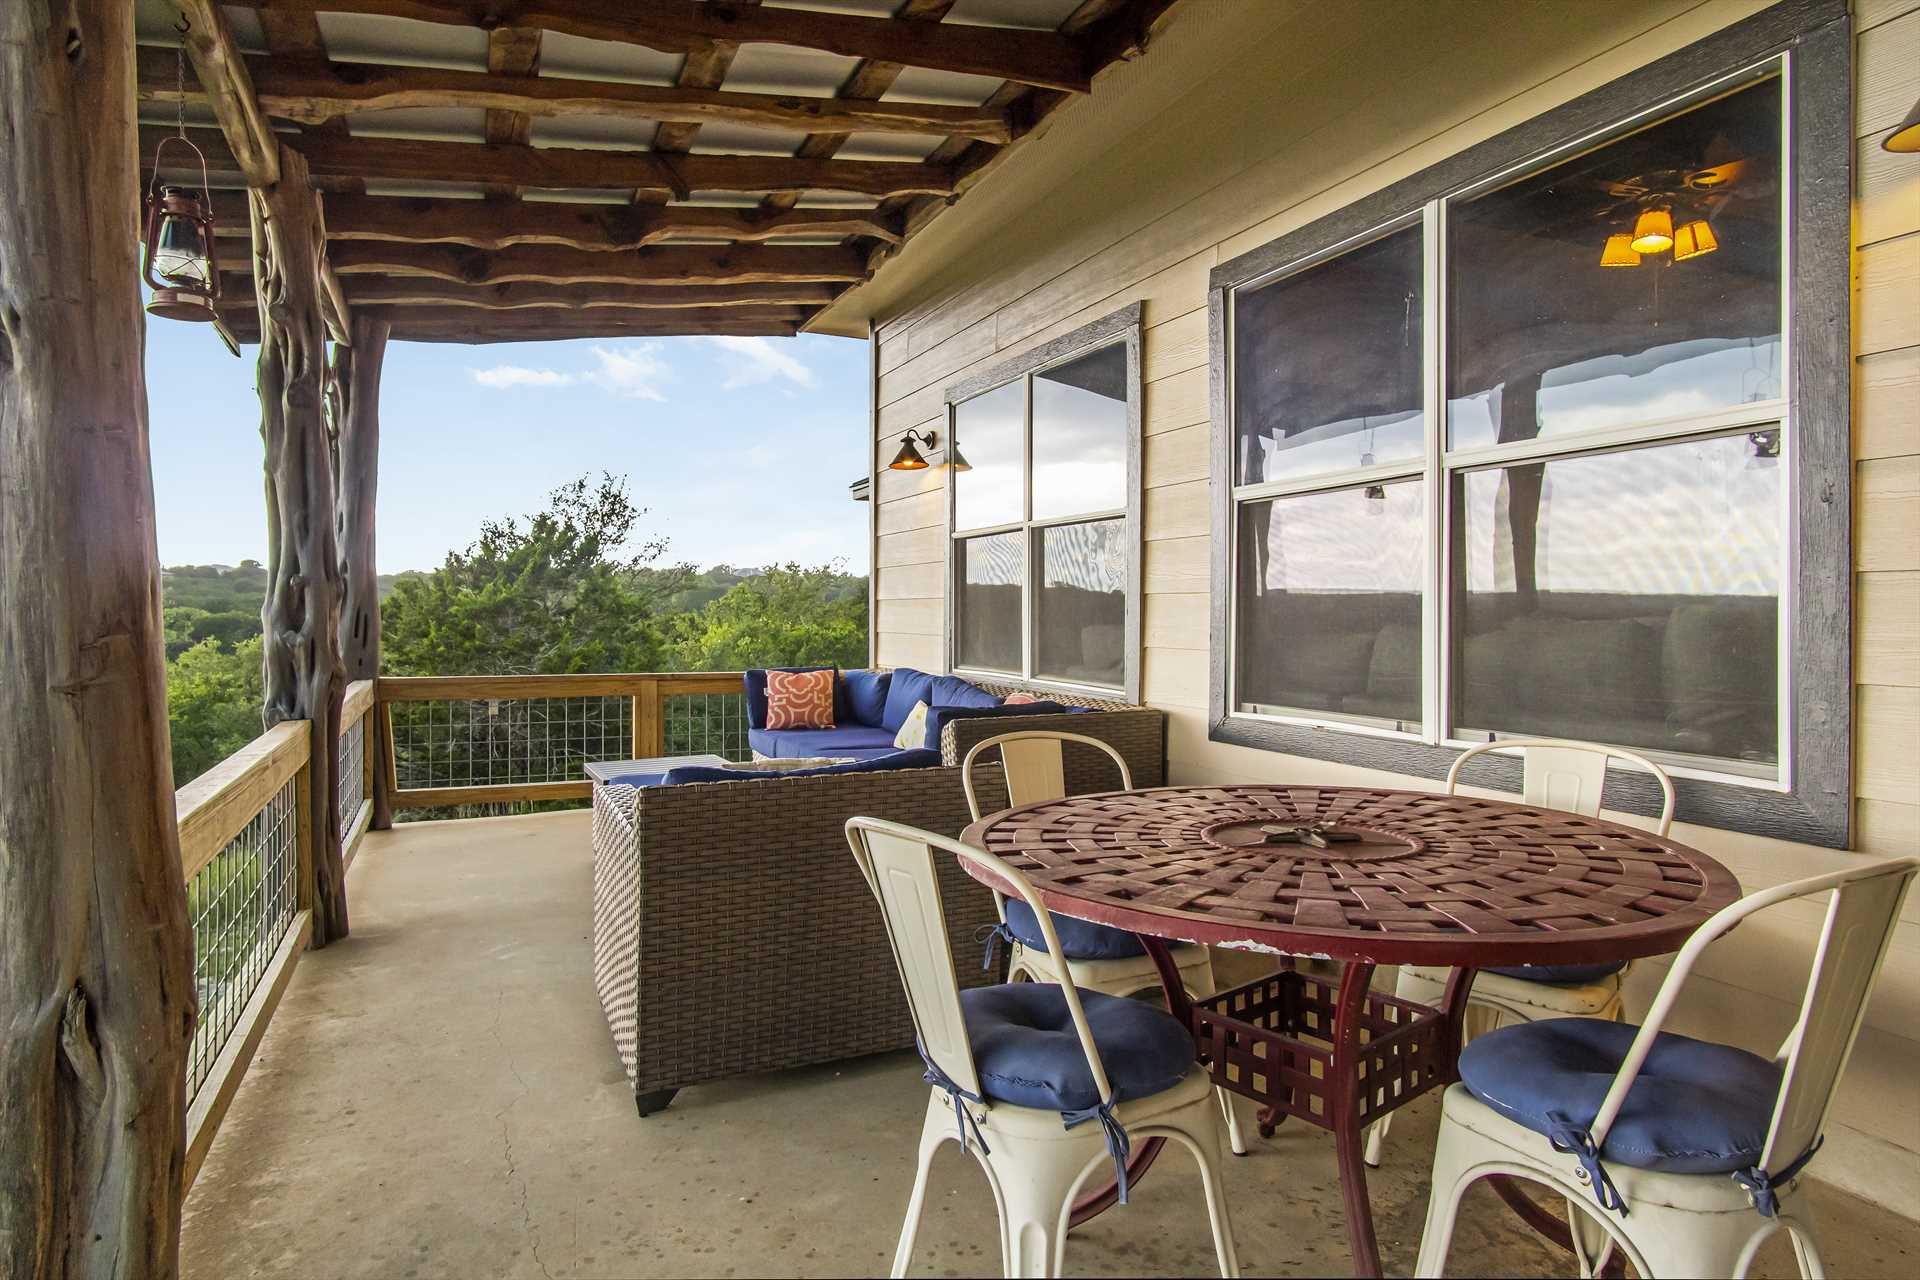                                                 Comfortable seating on the shaded patio gives you incredible Hill Country views from your mountain perch!